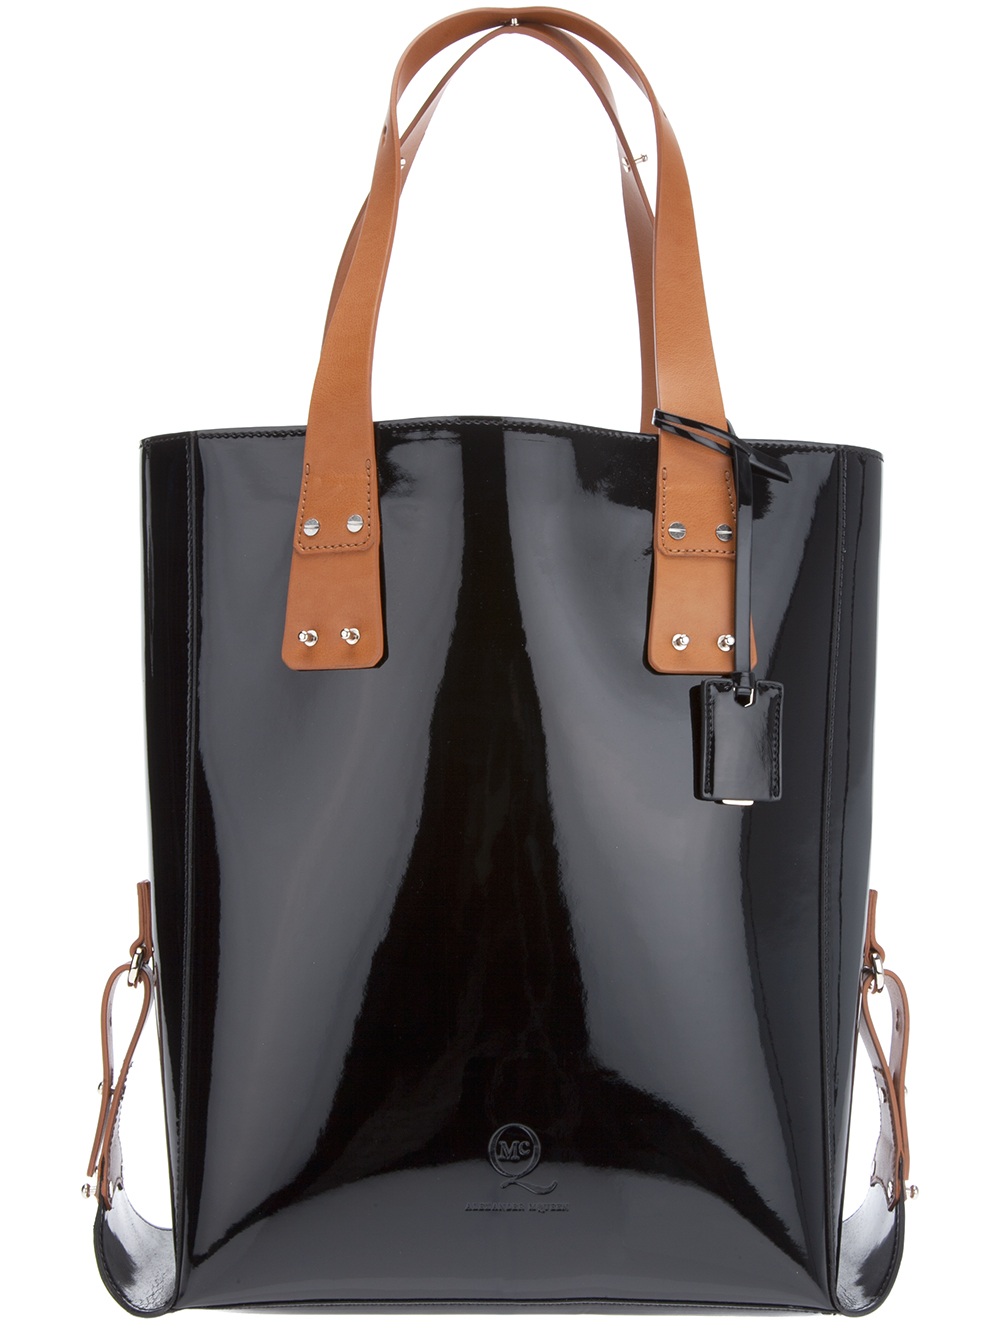 Mcq By Alexander Mcqueen Patent Polyurethane Tote Bag in Black | Lyst